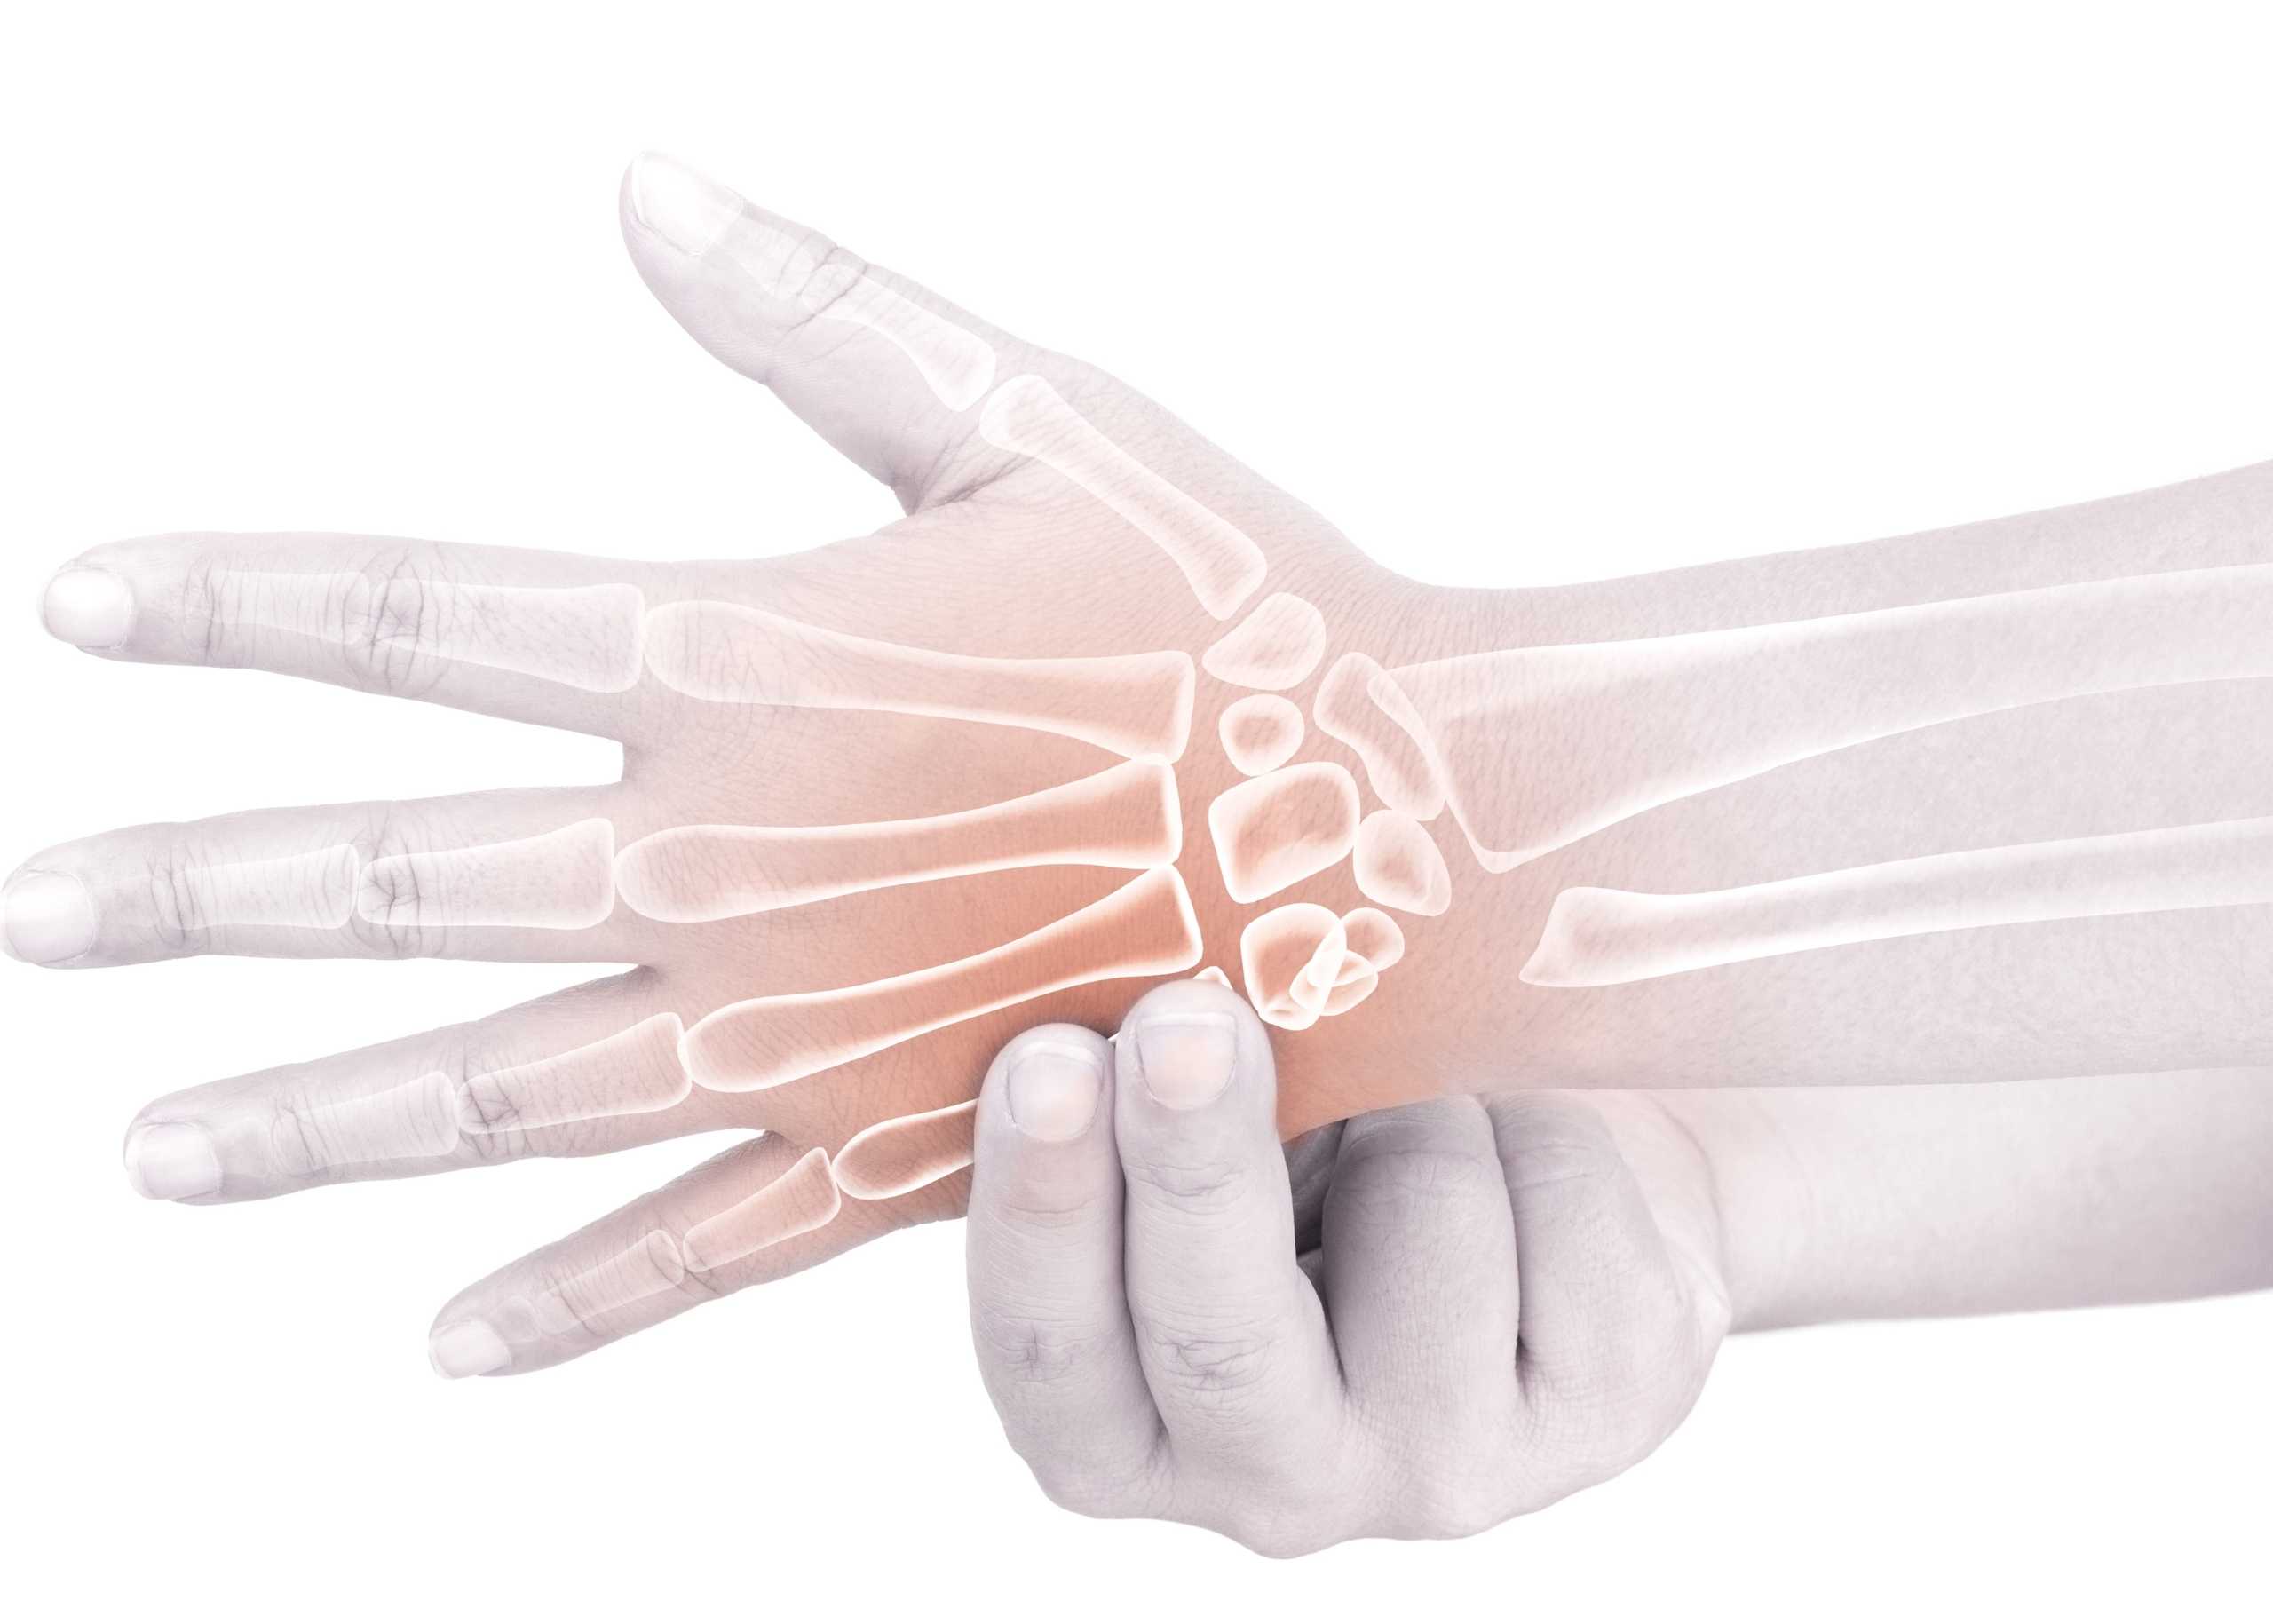 Hand Fracture – Signs, Symptoms, and Treatment